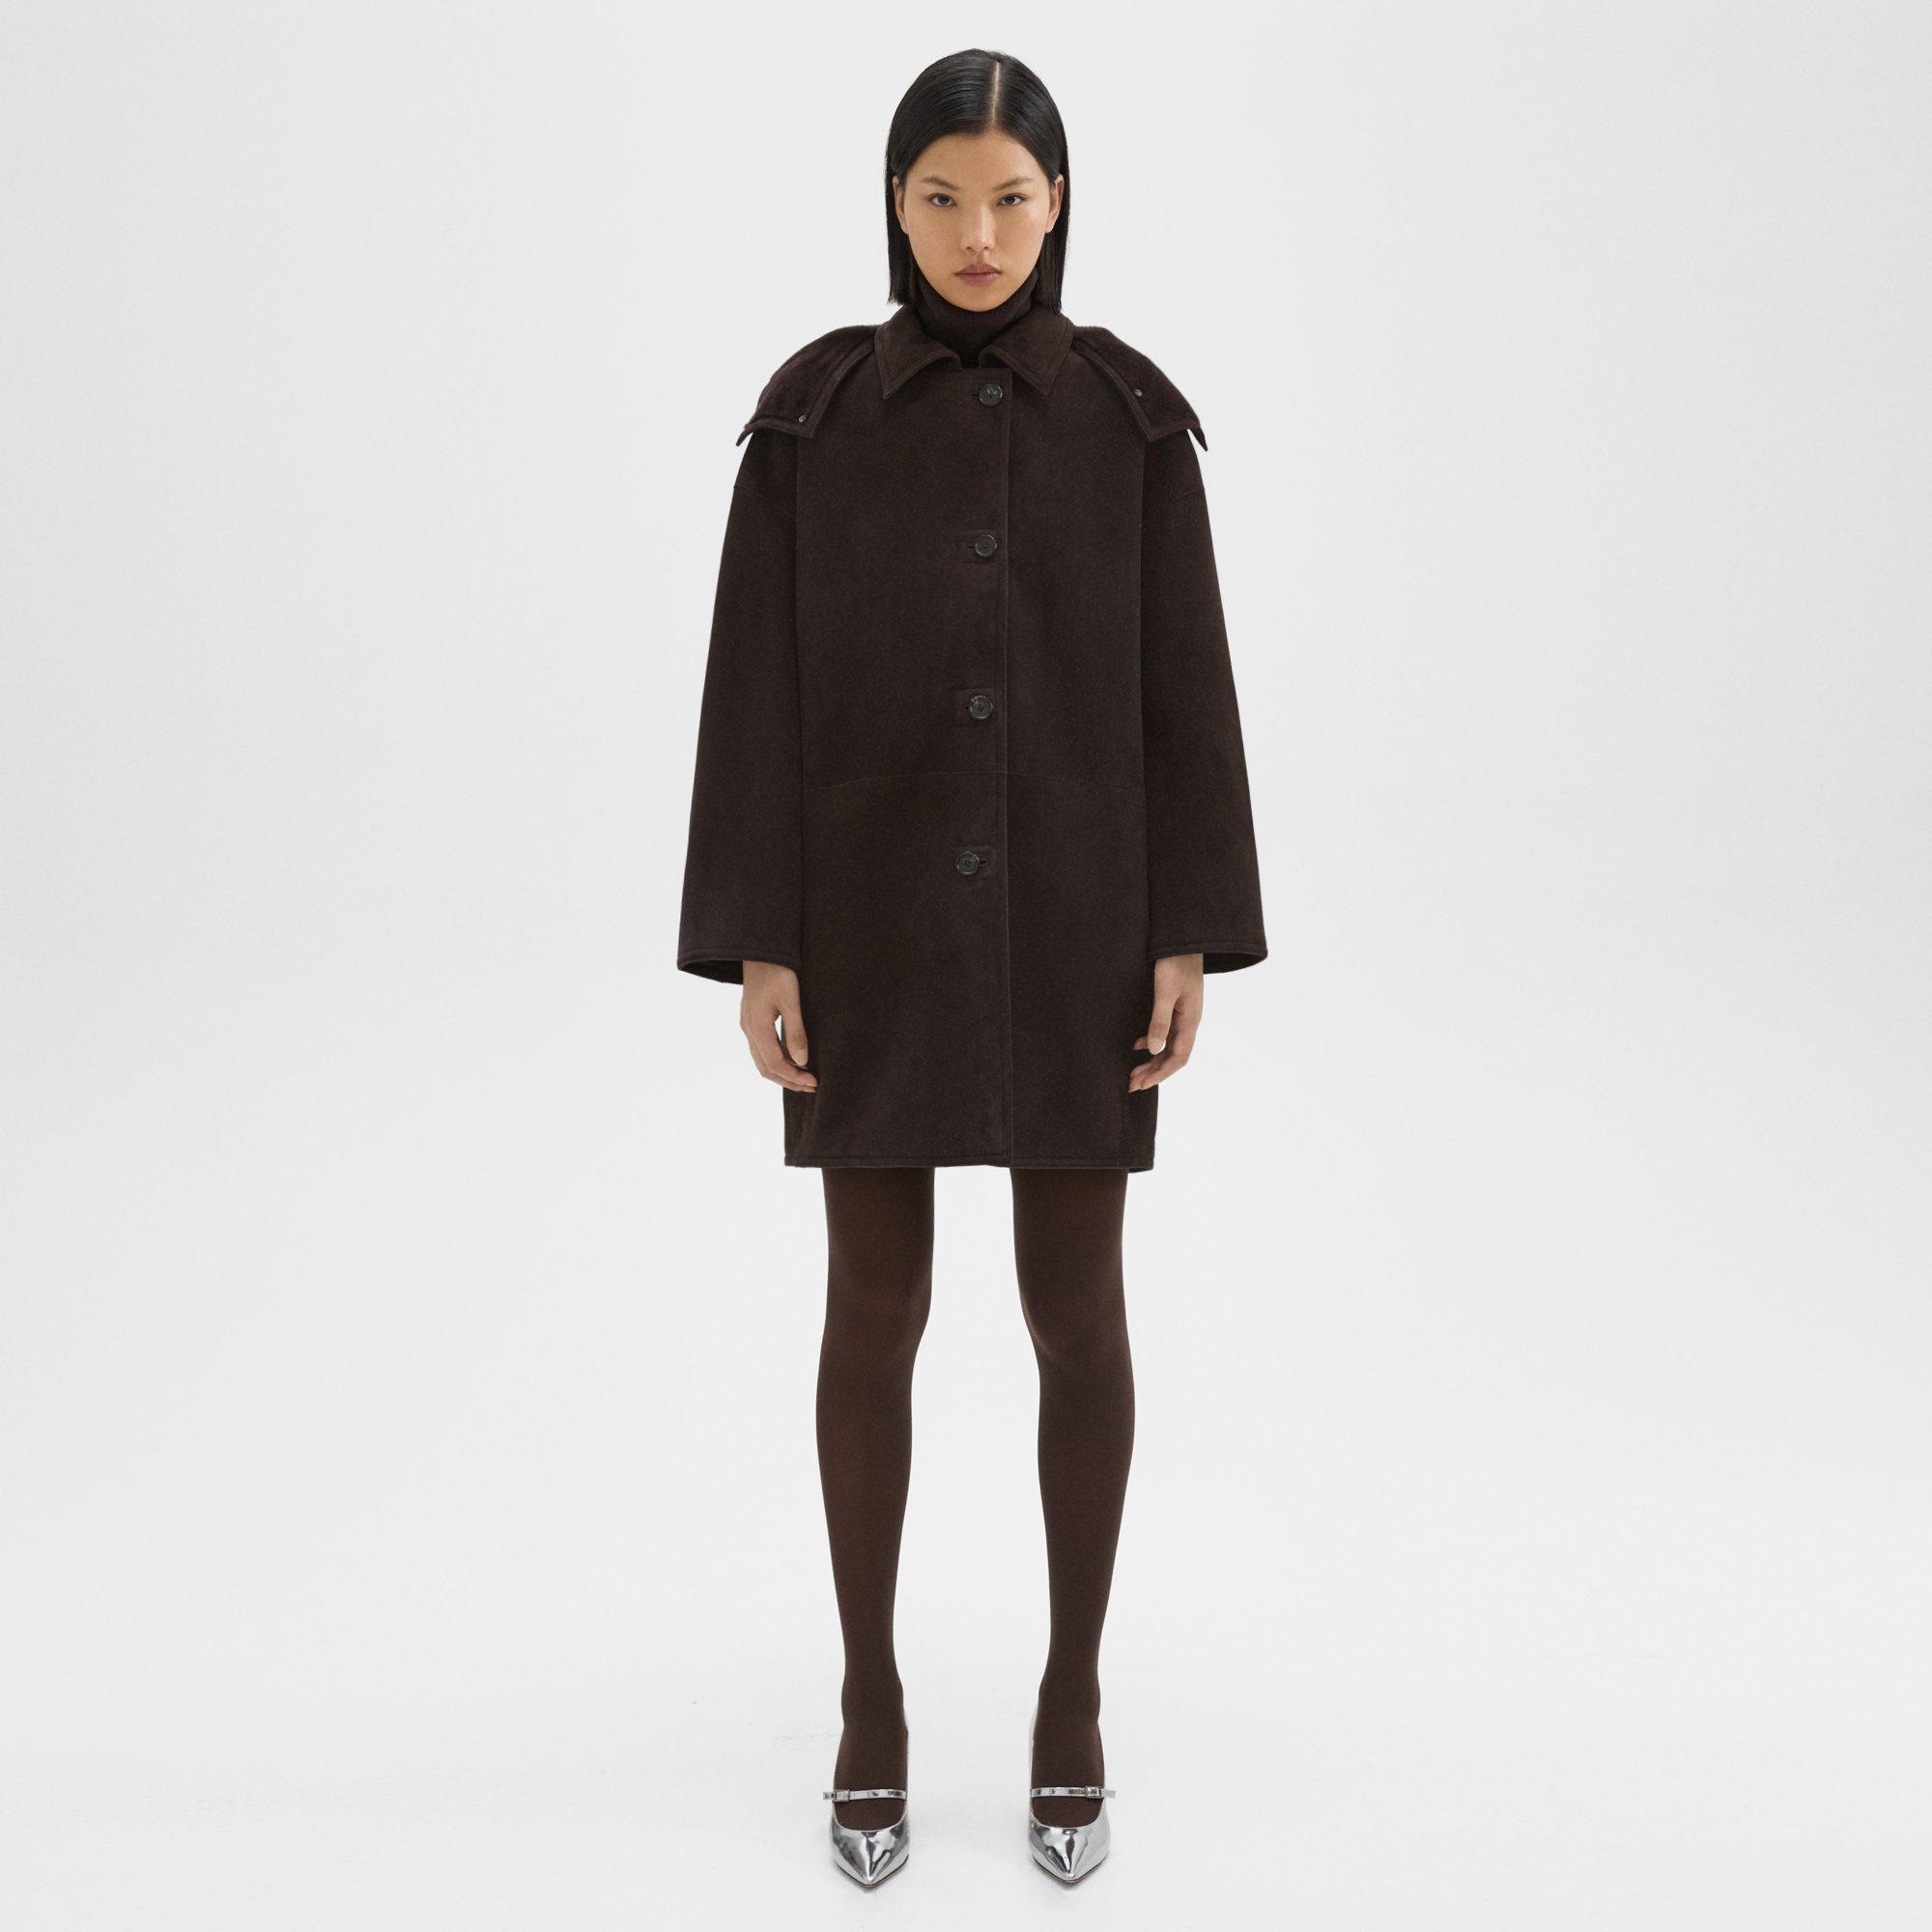 THEORY HOODED REVERSIBLE COAT IN SHEARLING